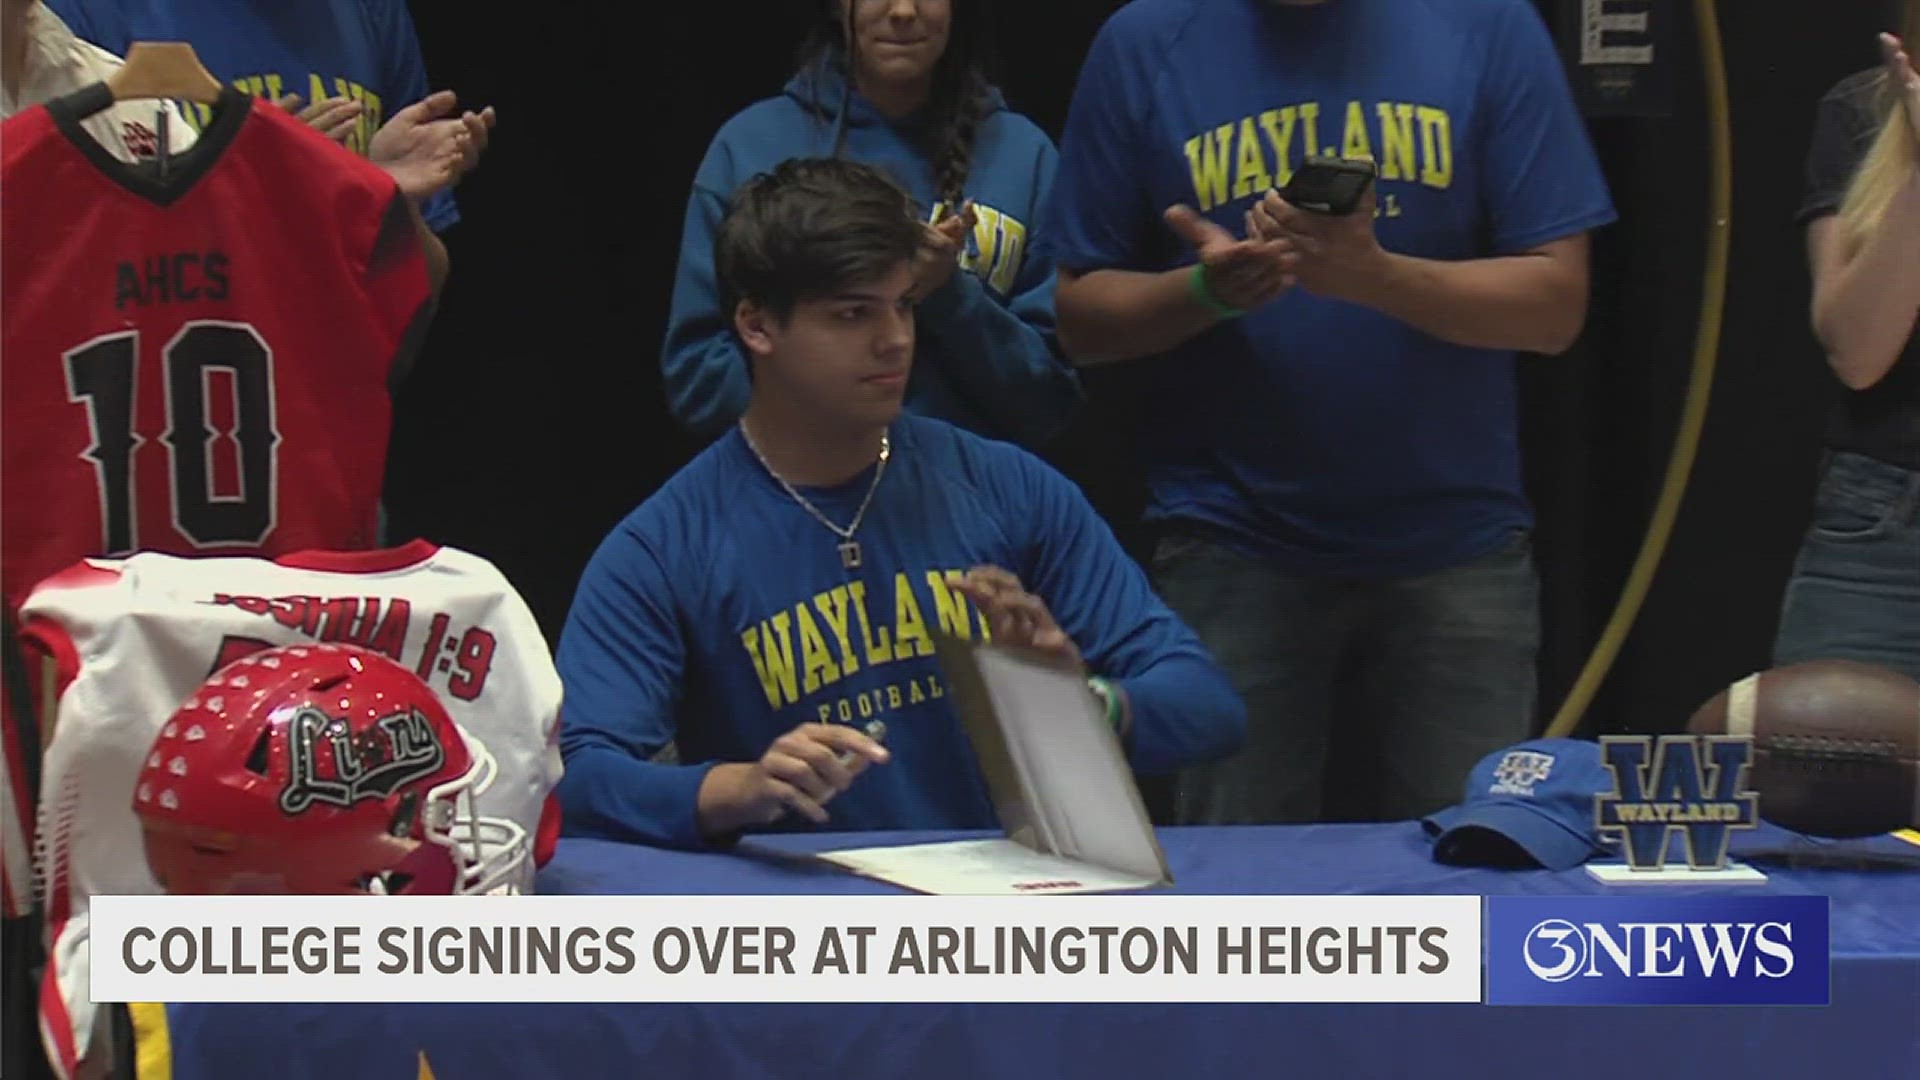 Ryan Trevino (Wayland Baptist football) and Andrew Hill (Southwestern Kansas golf) are both moving on to the college level.